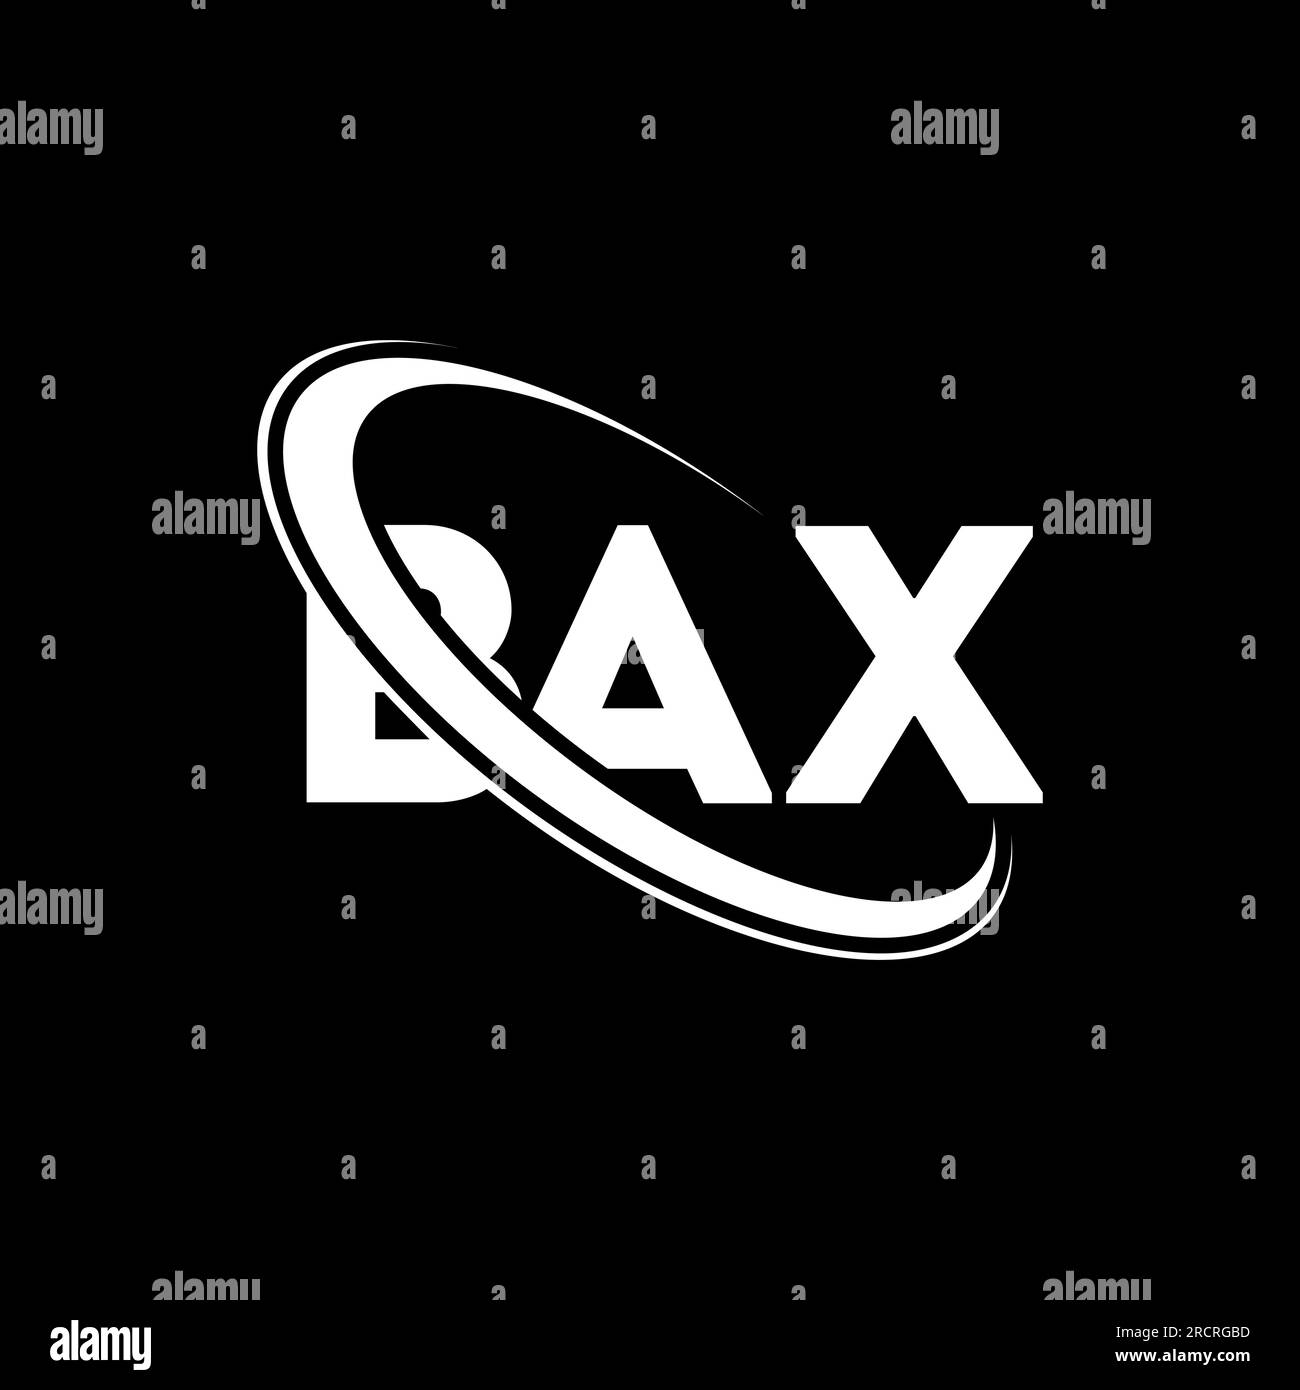 BAX logo. BAX letter. BAX letter logo design. Initials BAX logo linked with circle and uppercase monogram logo. BAX typography for technology, busines Stock Vector